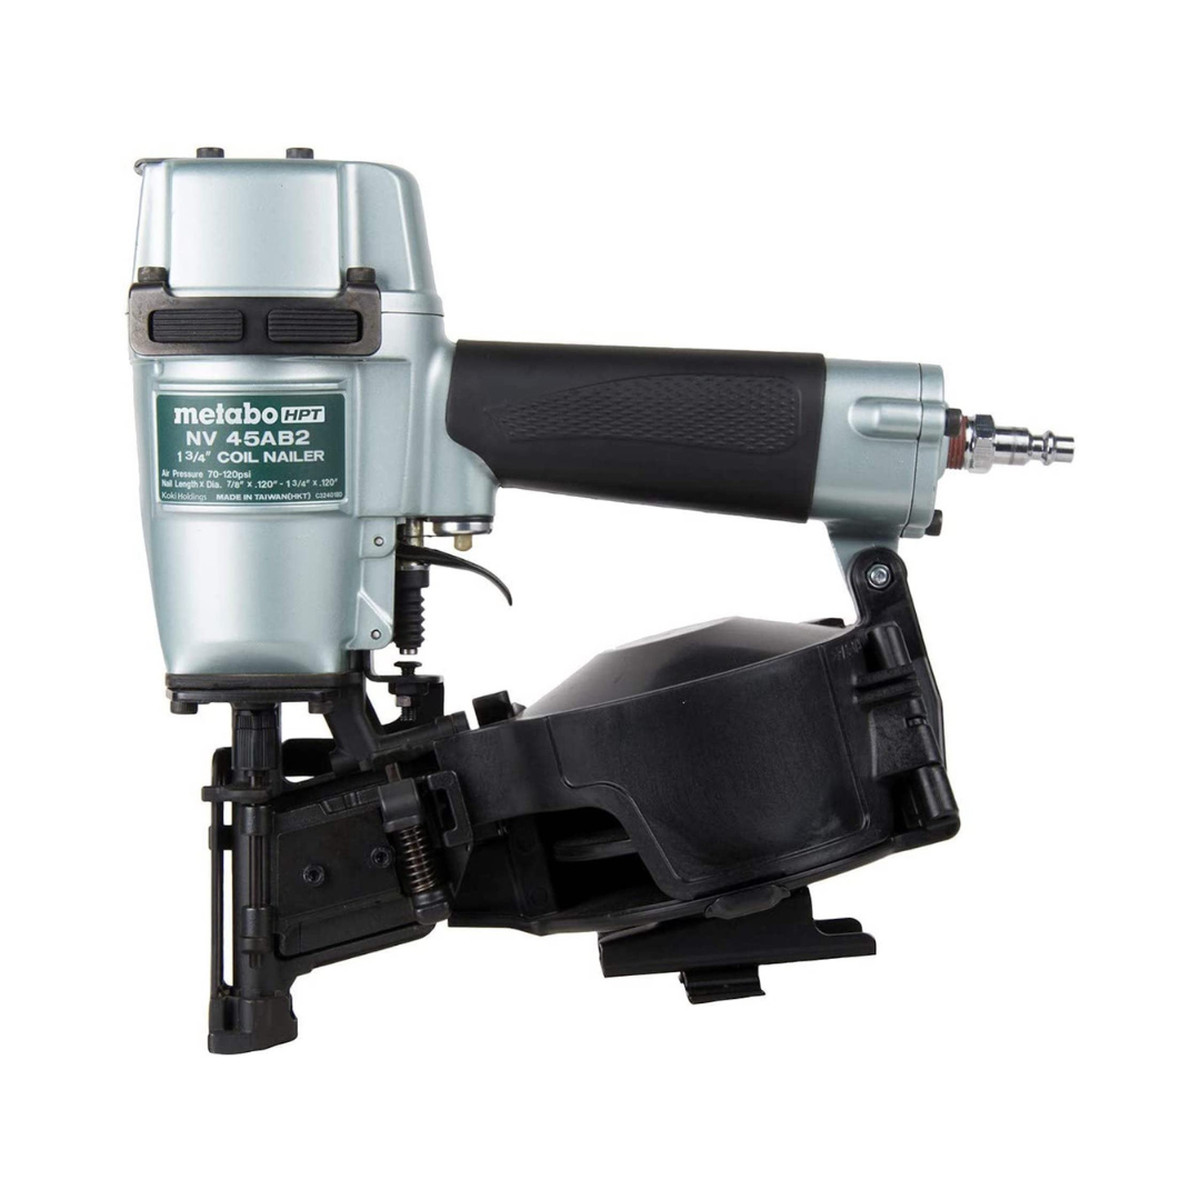 Best Roofing Nailer: Metabo HPT Roofing Nailer